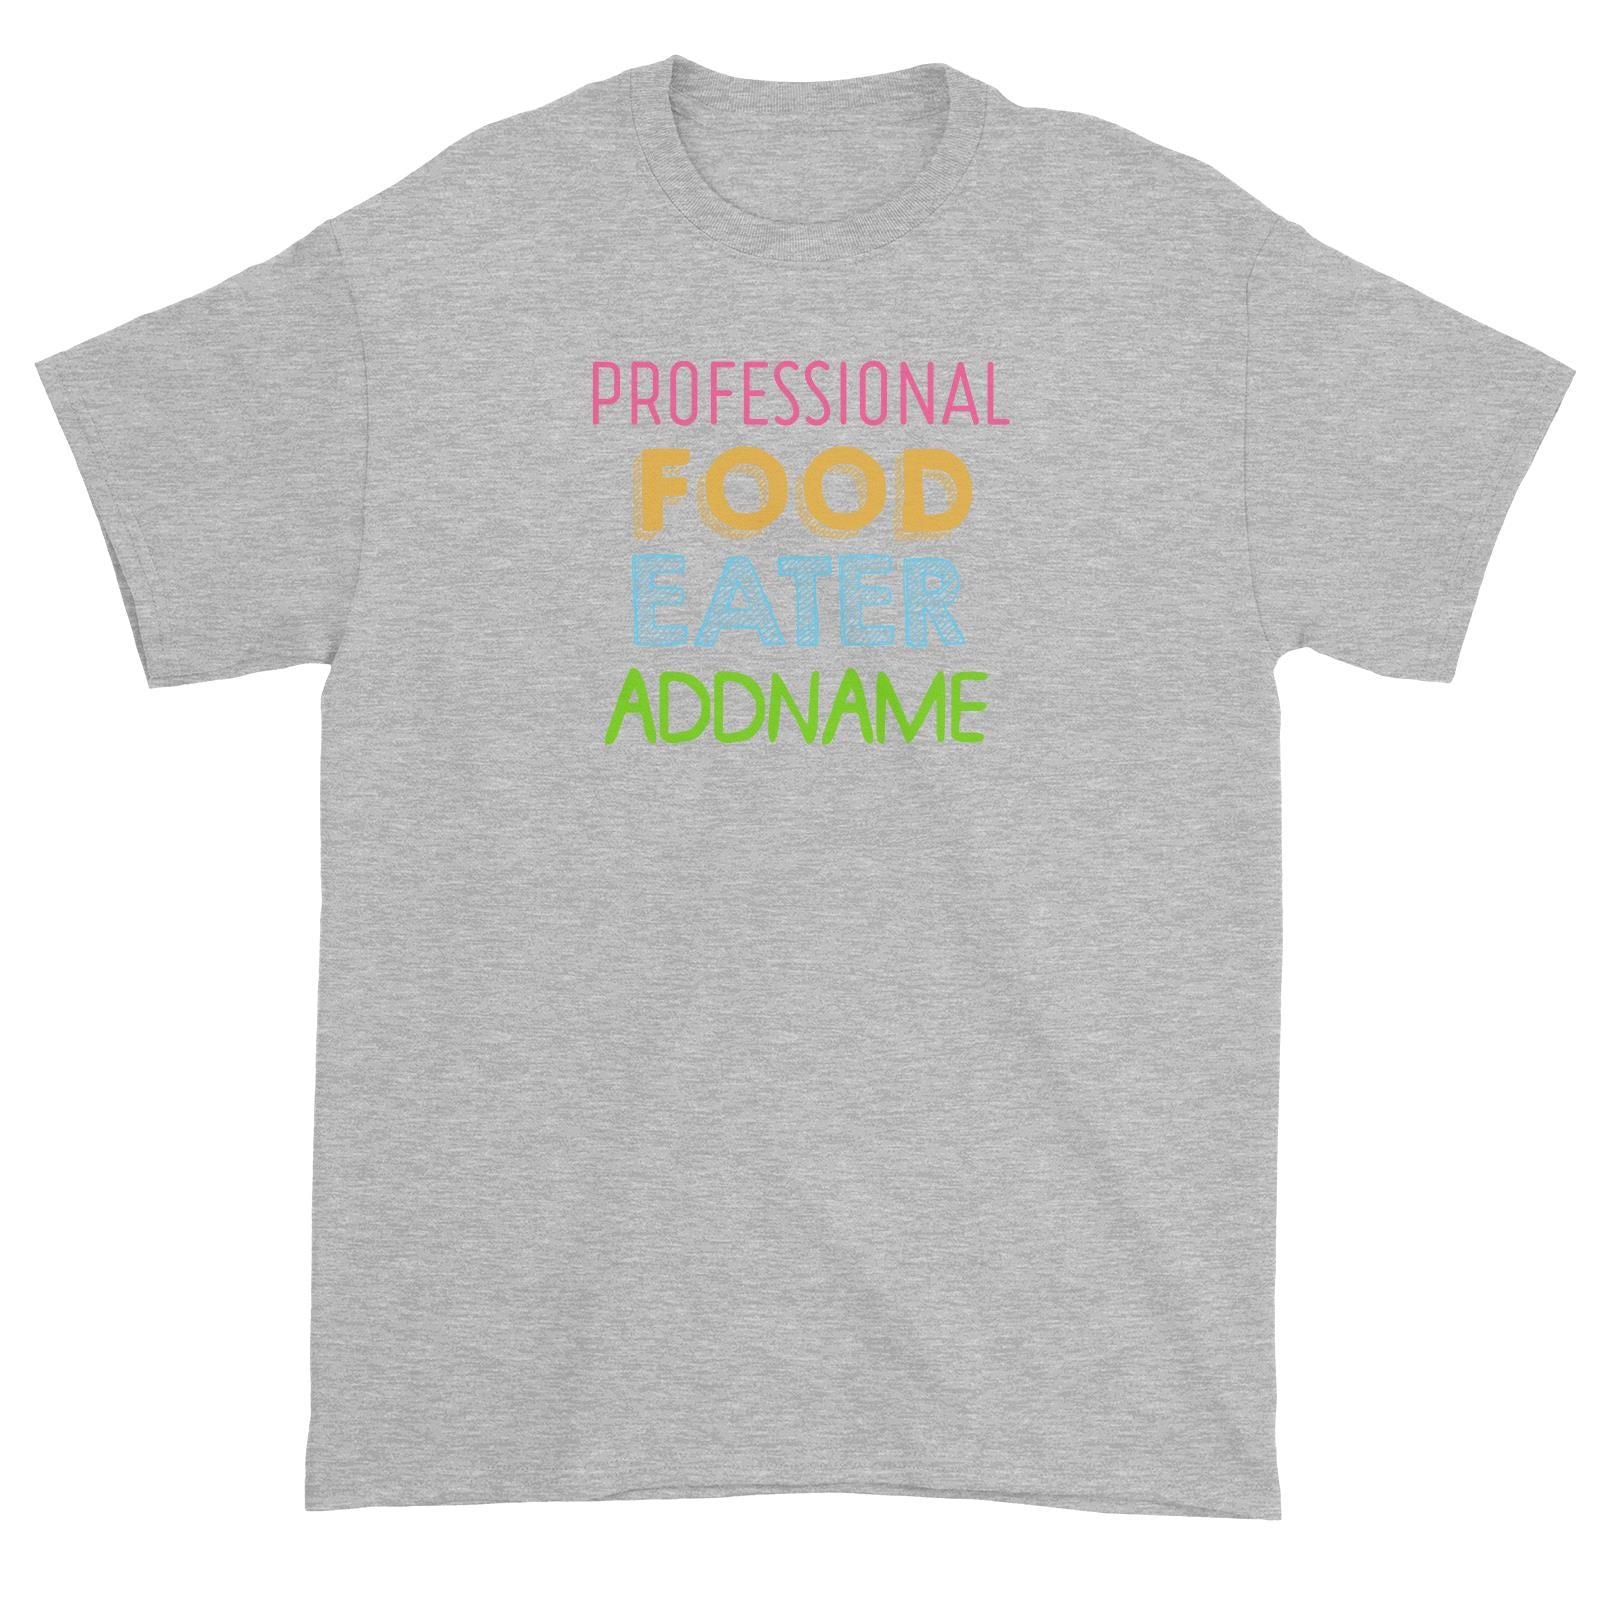 Professional Food Eater Addname Unisex T-Shirt